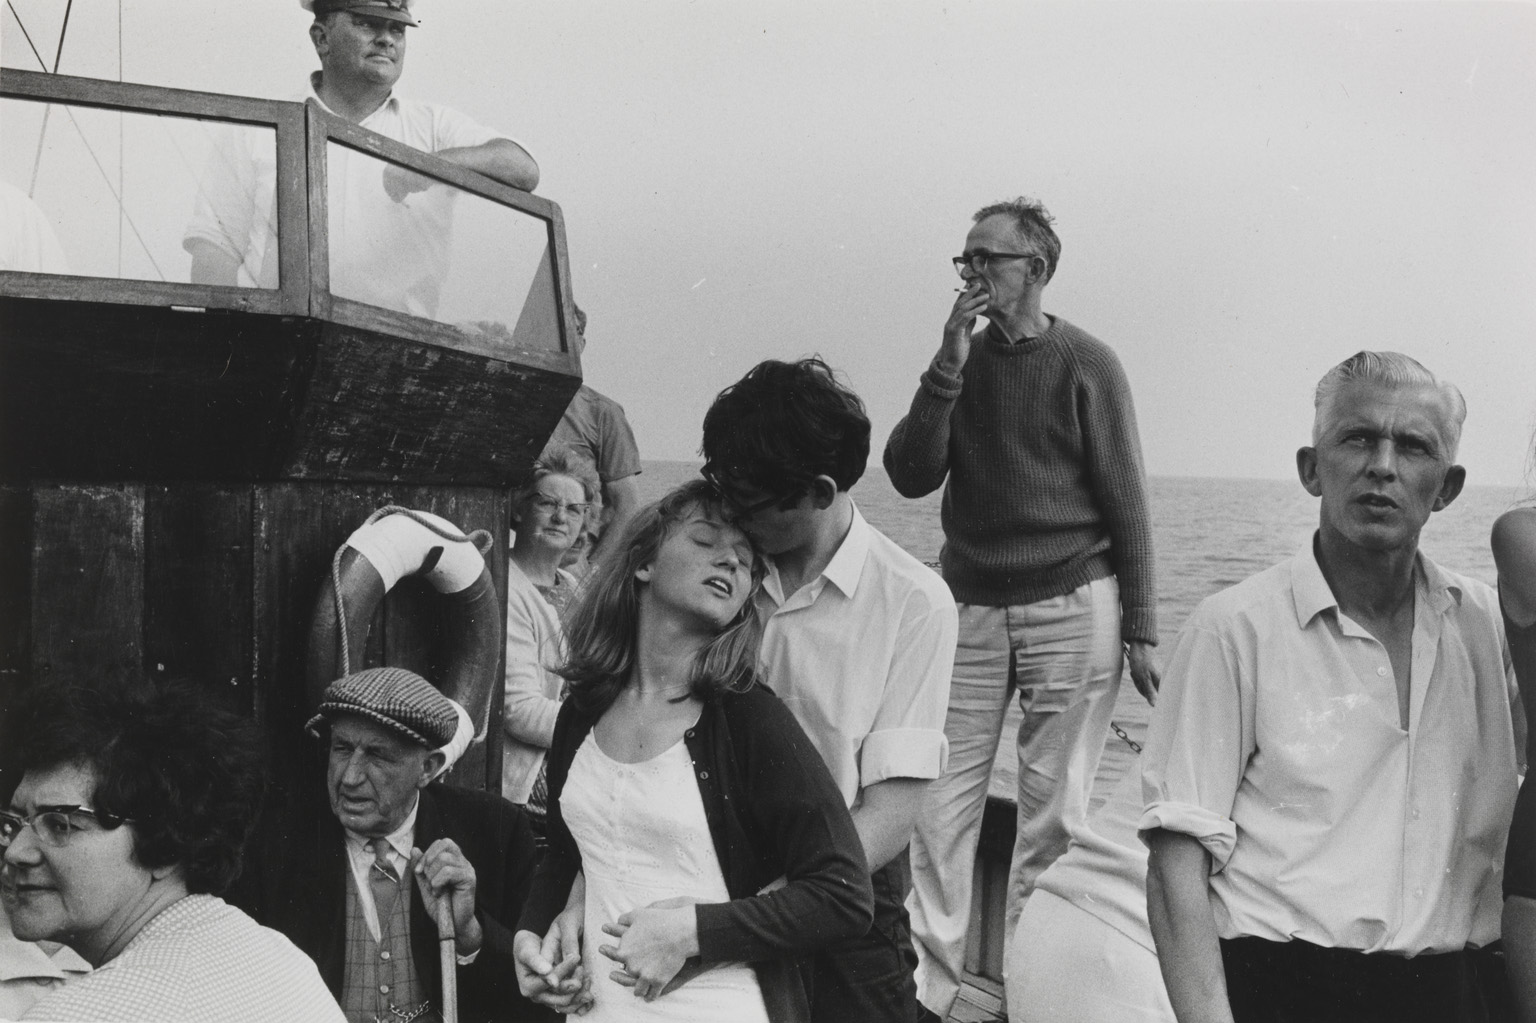 Group of passengers on a pleasure boat trip from Beachy Head